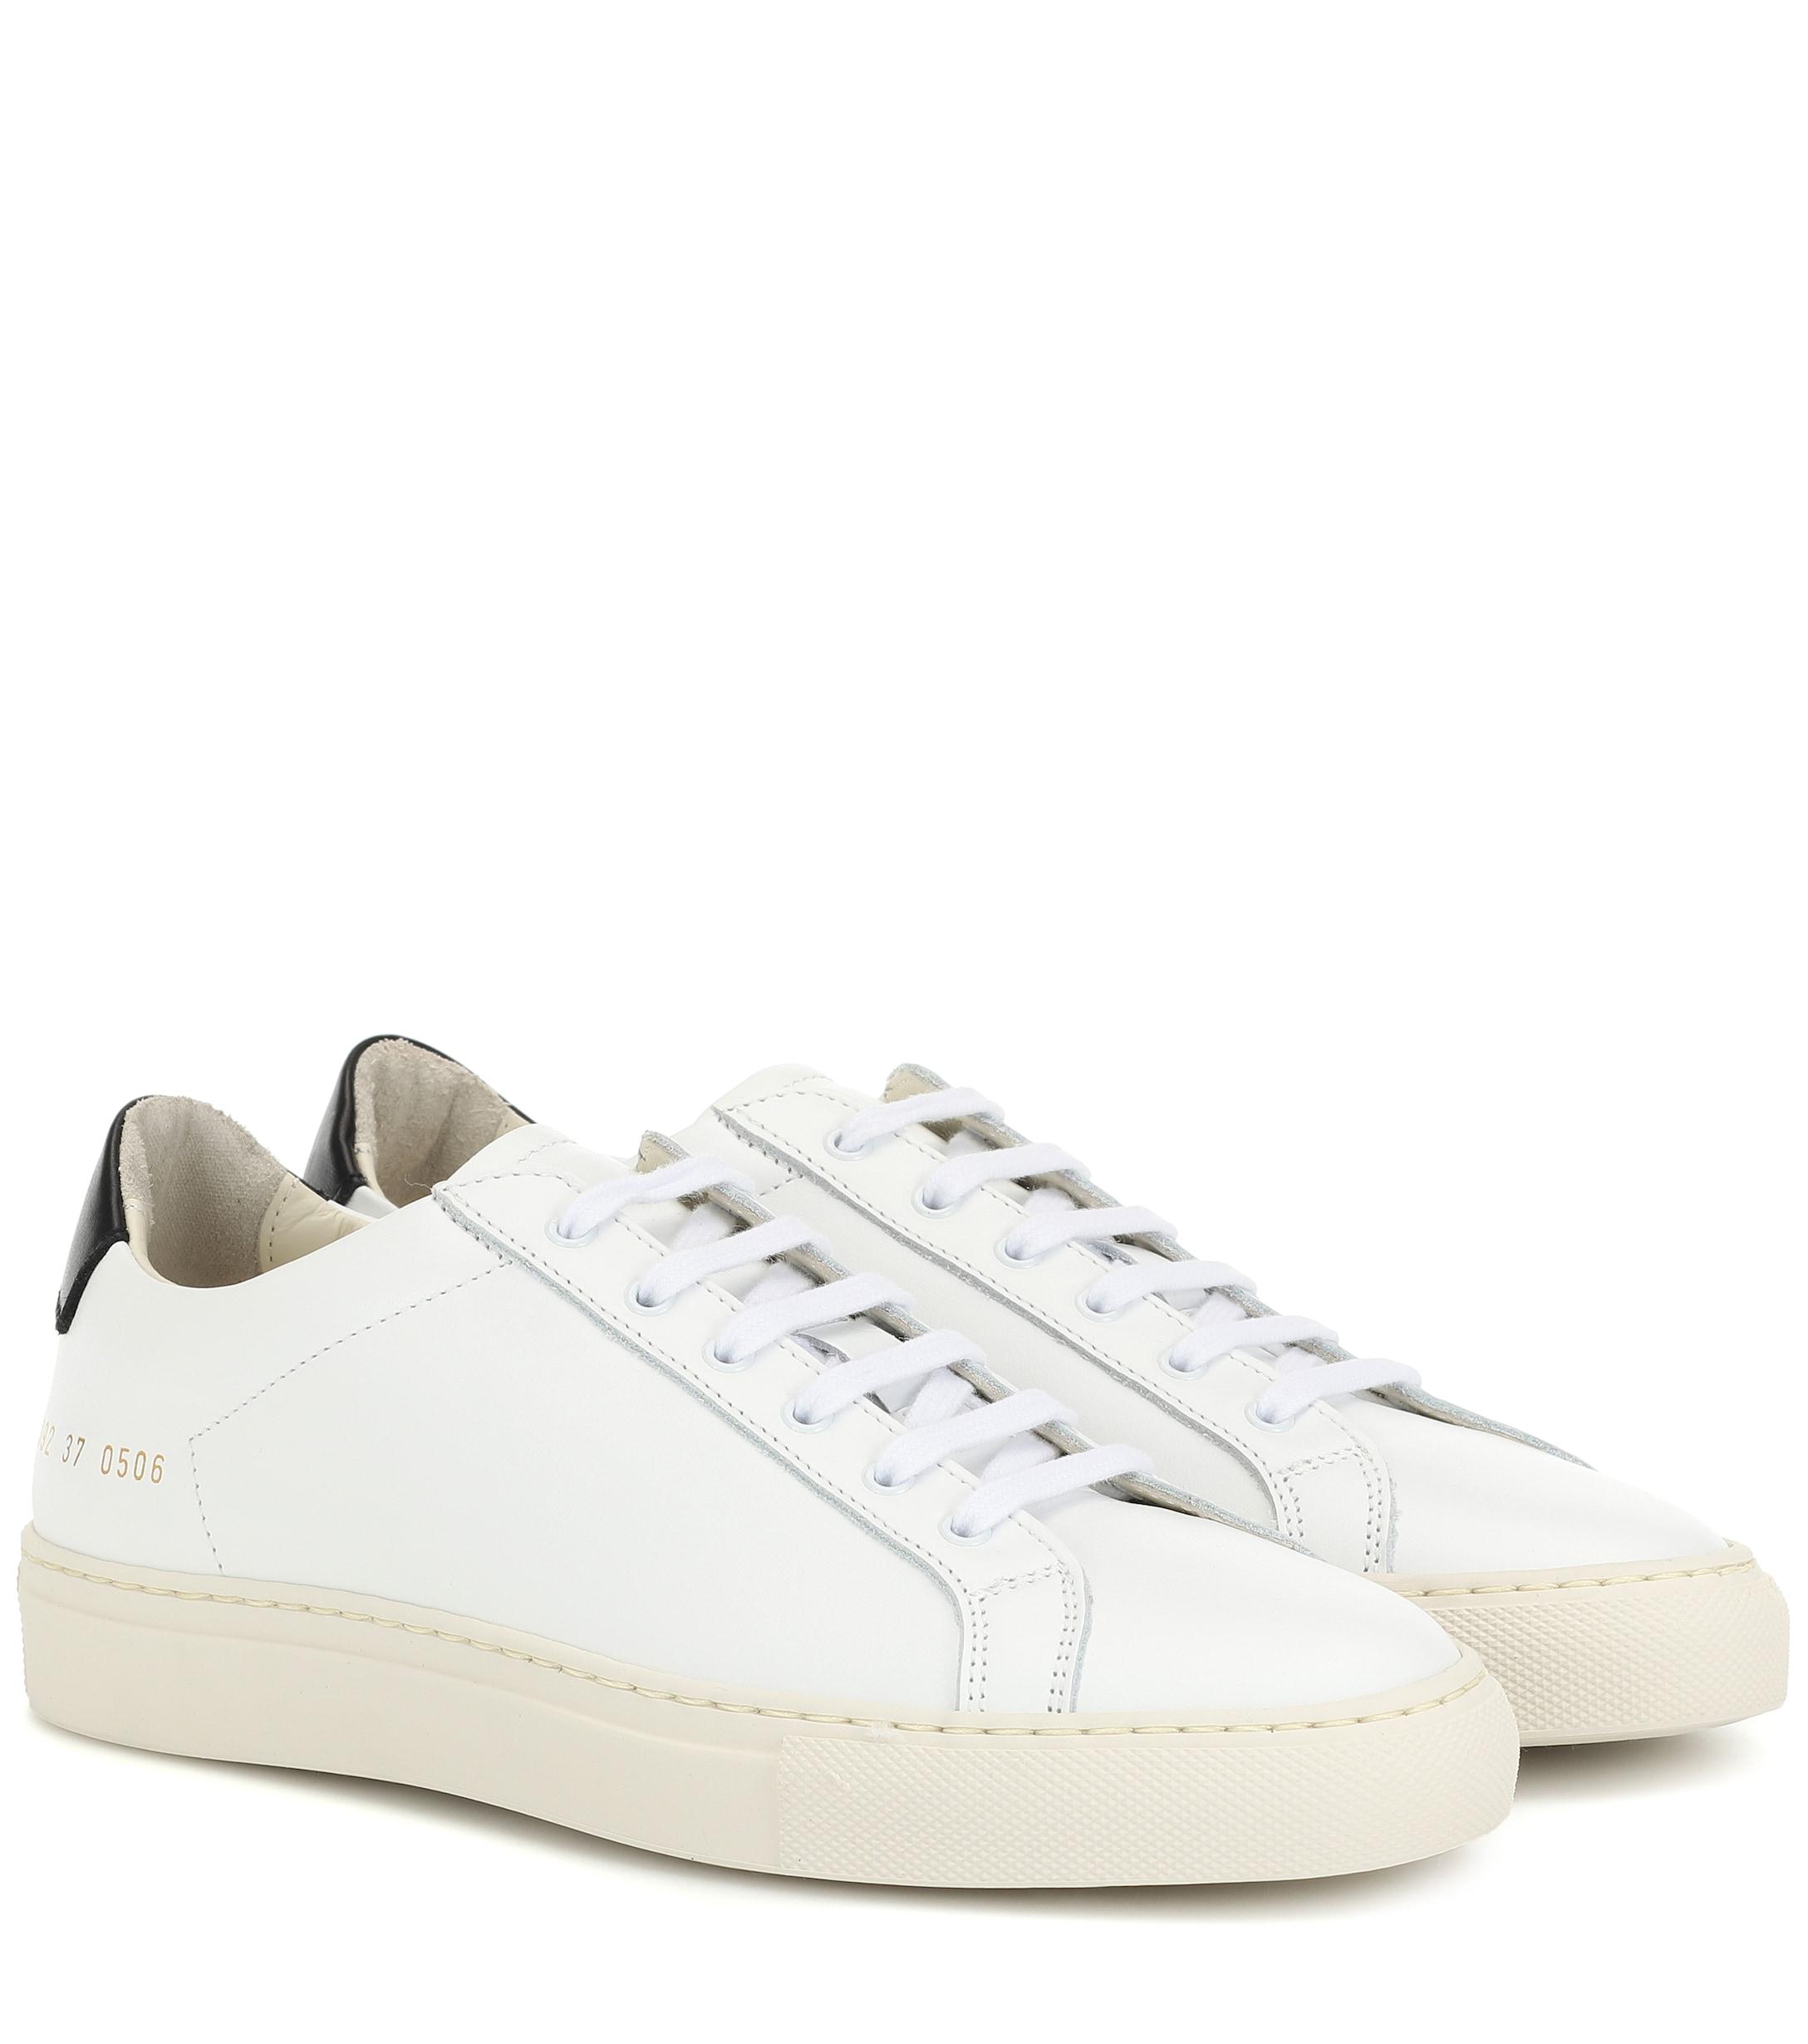 Common Projects Retro Leather Sneakers in White - Lyst